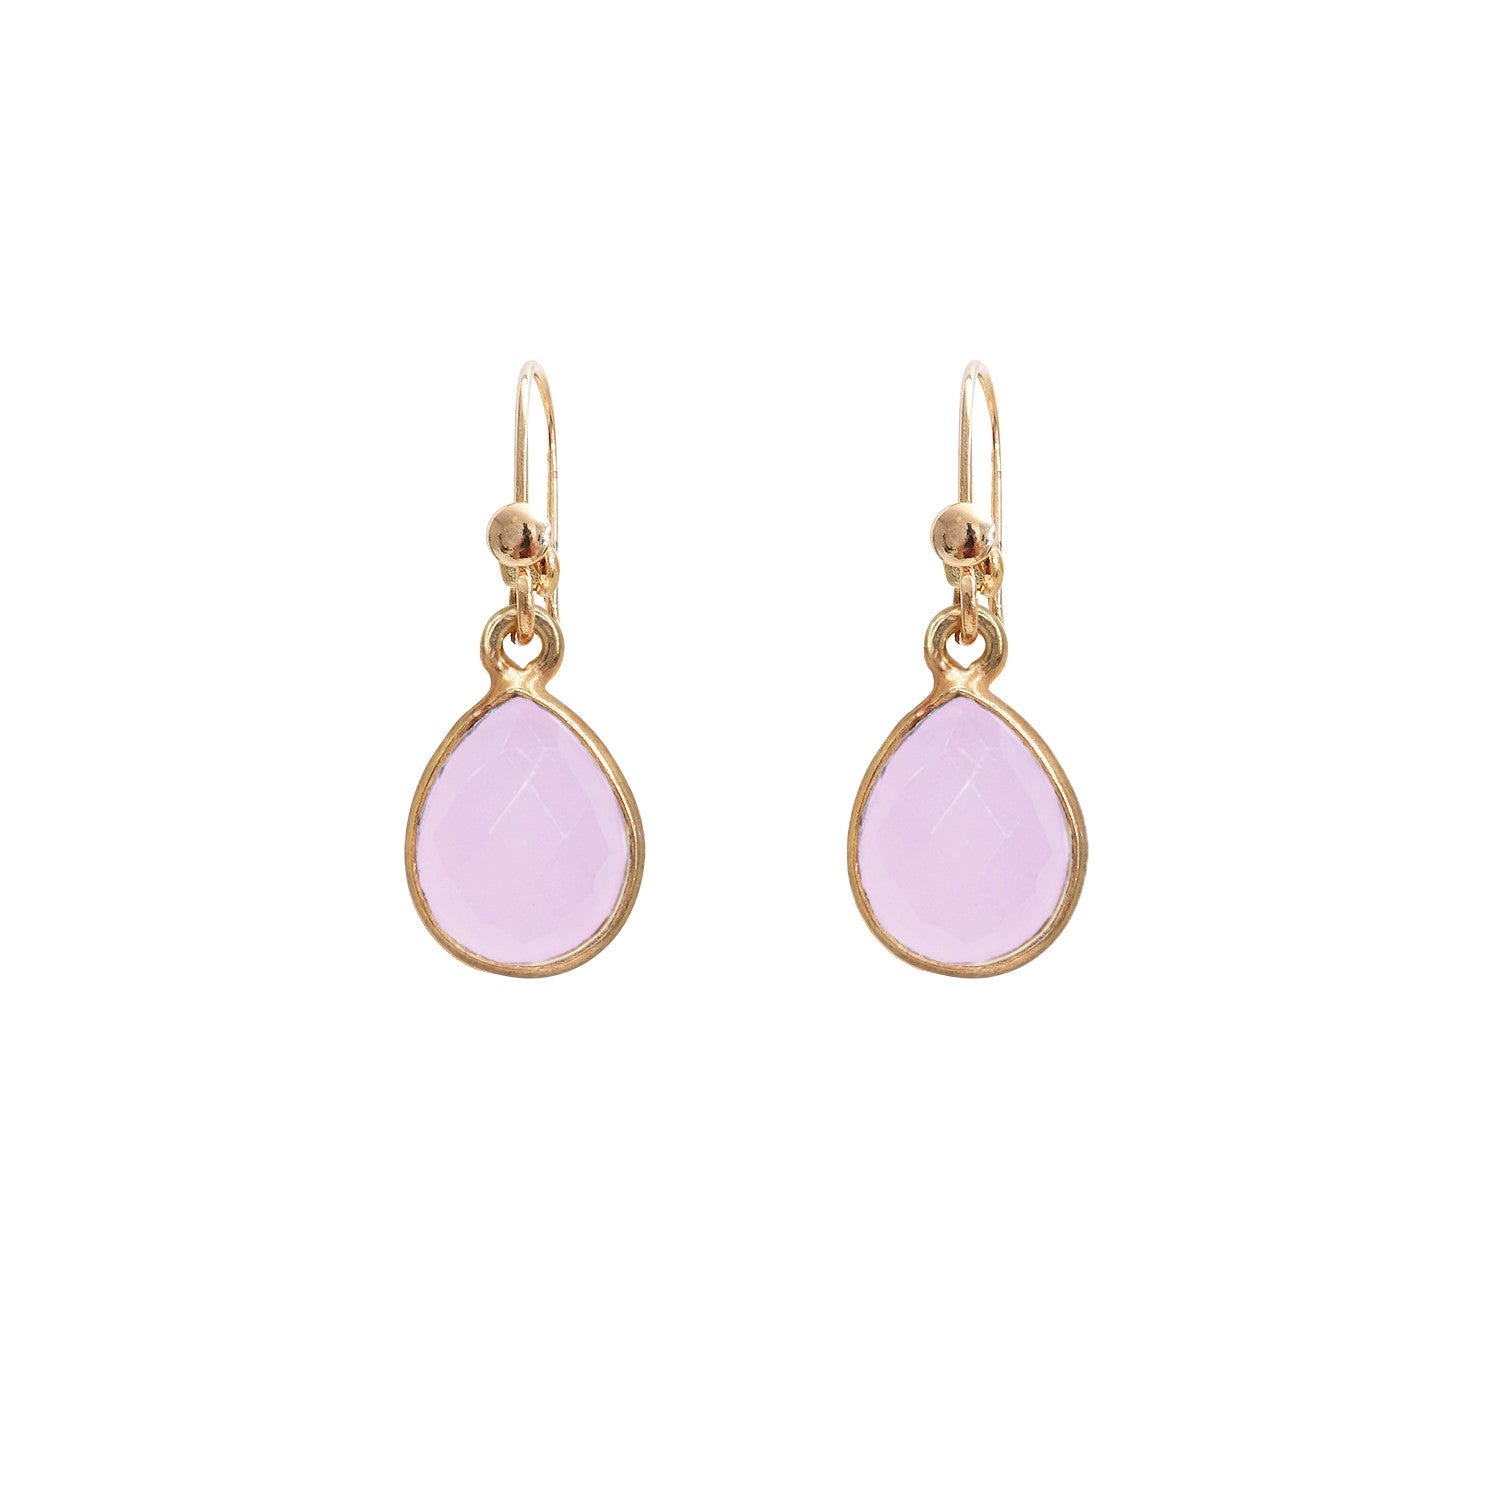 Color Stone earrings pink chalcedony